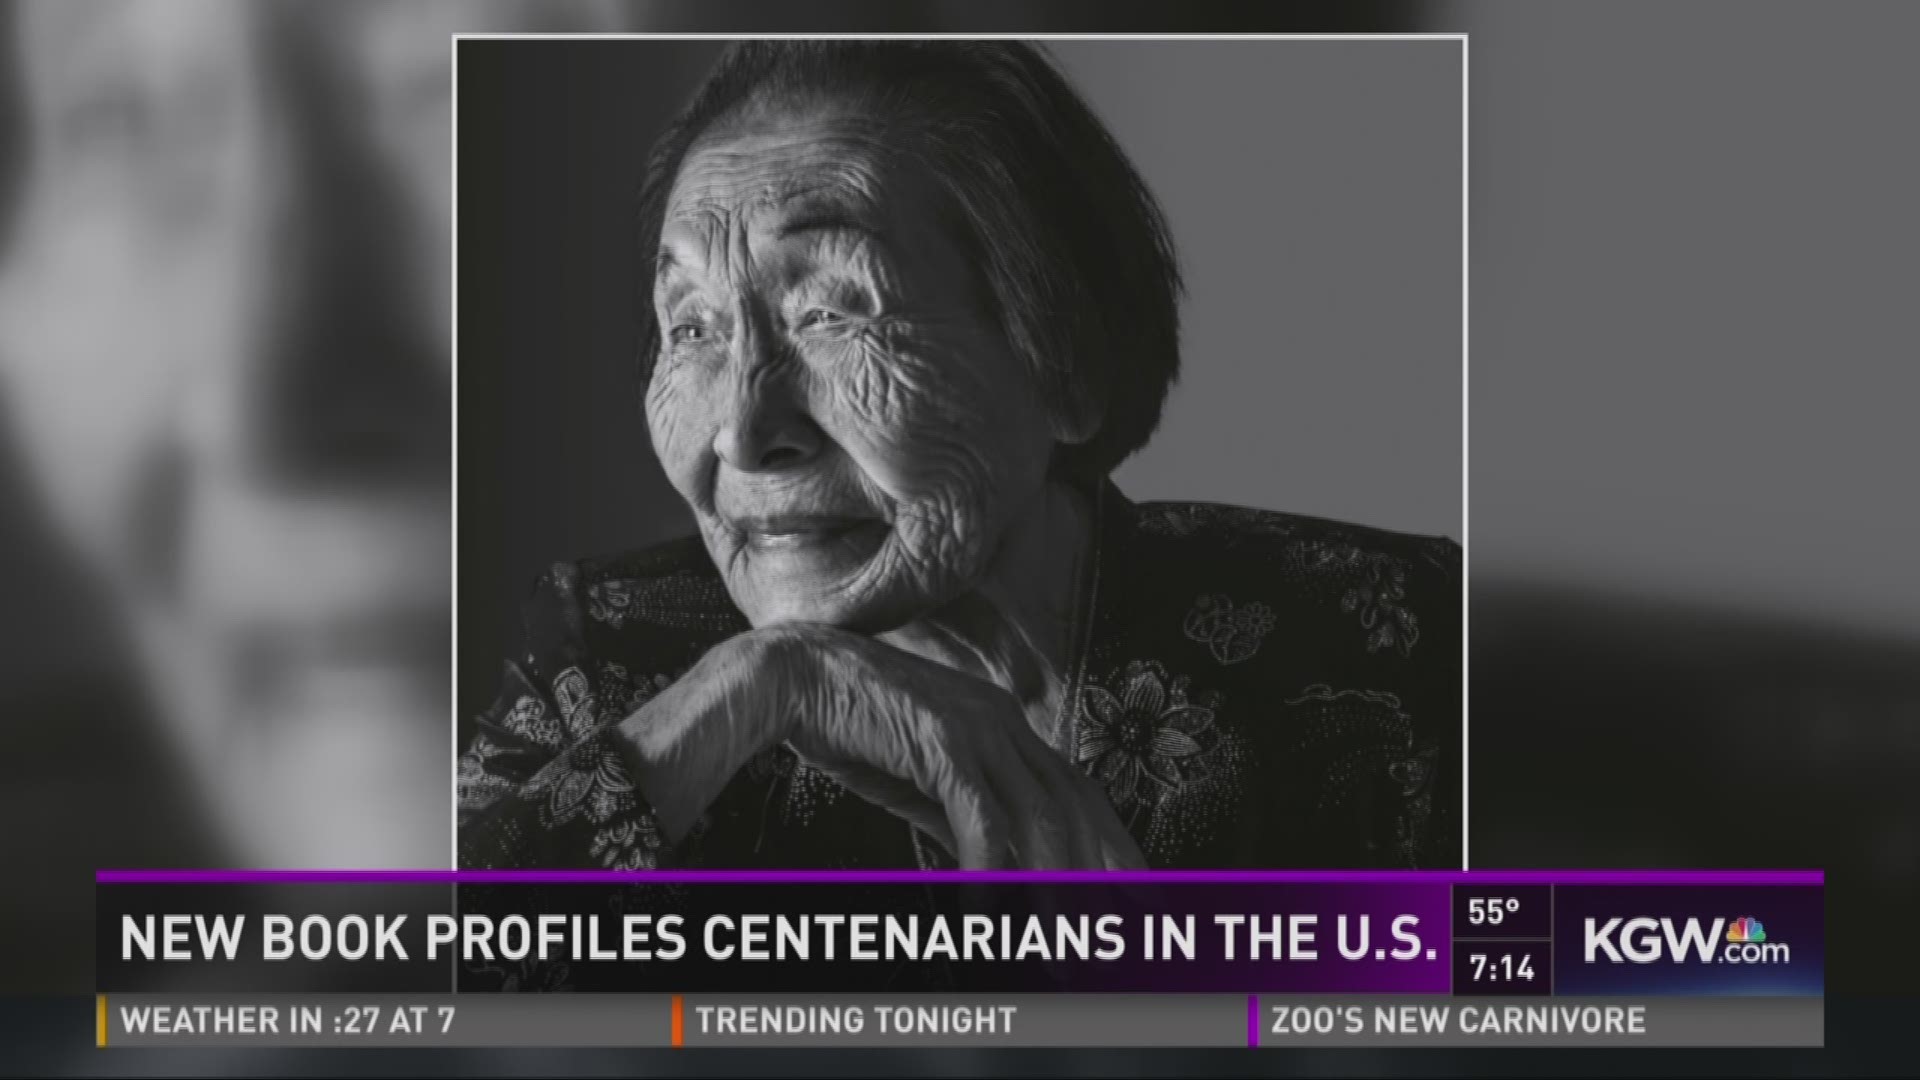 A new book profiles the lives of centenarians in the U.S